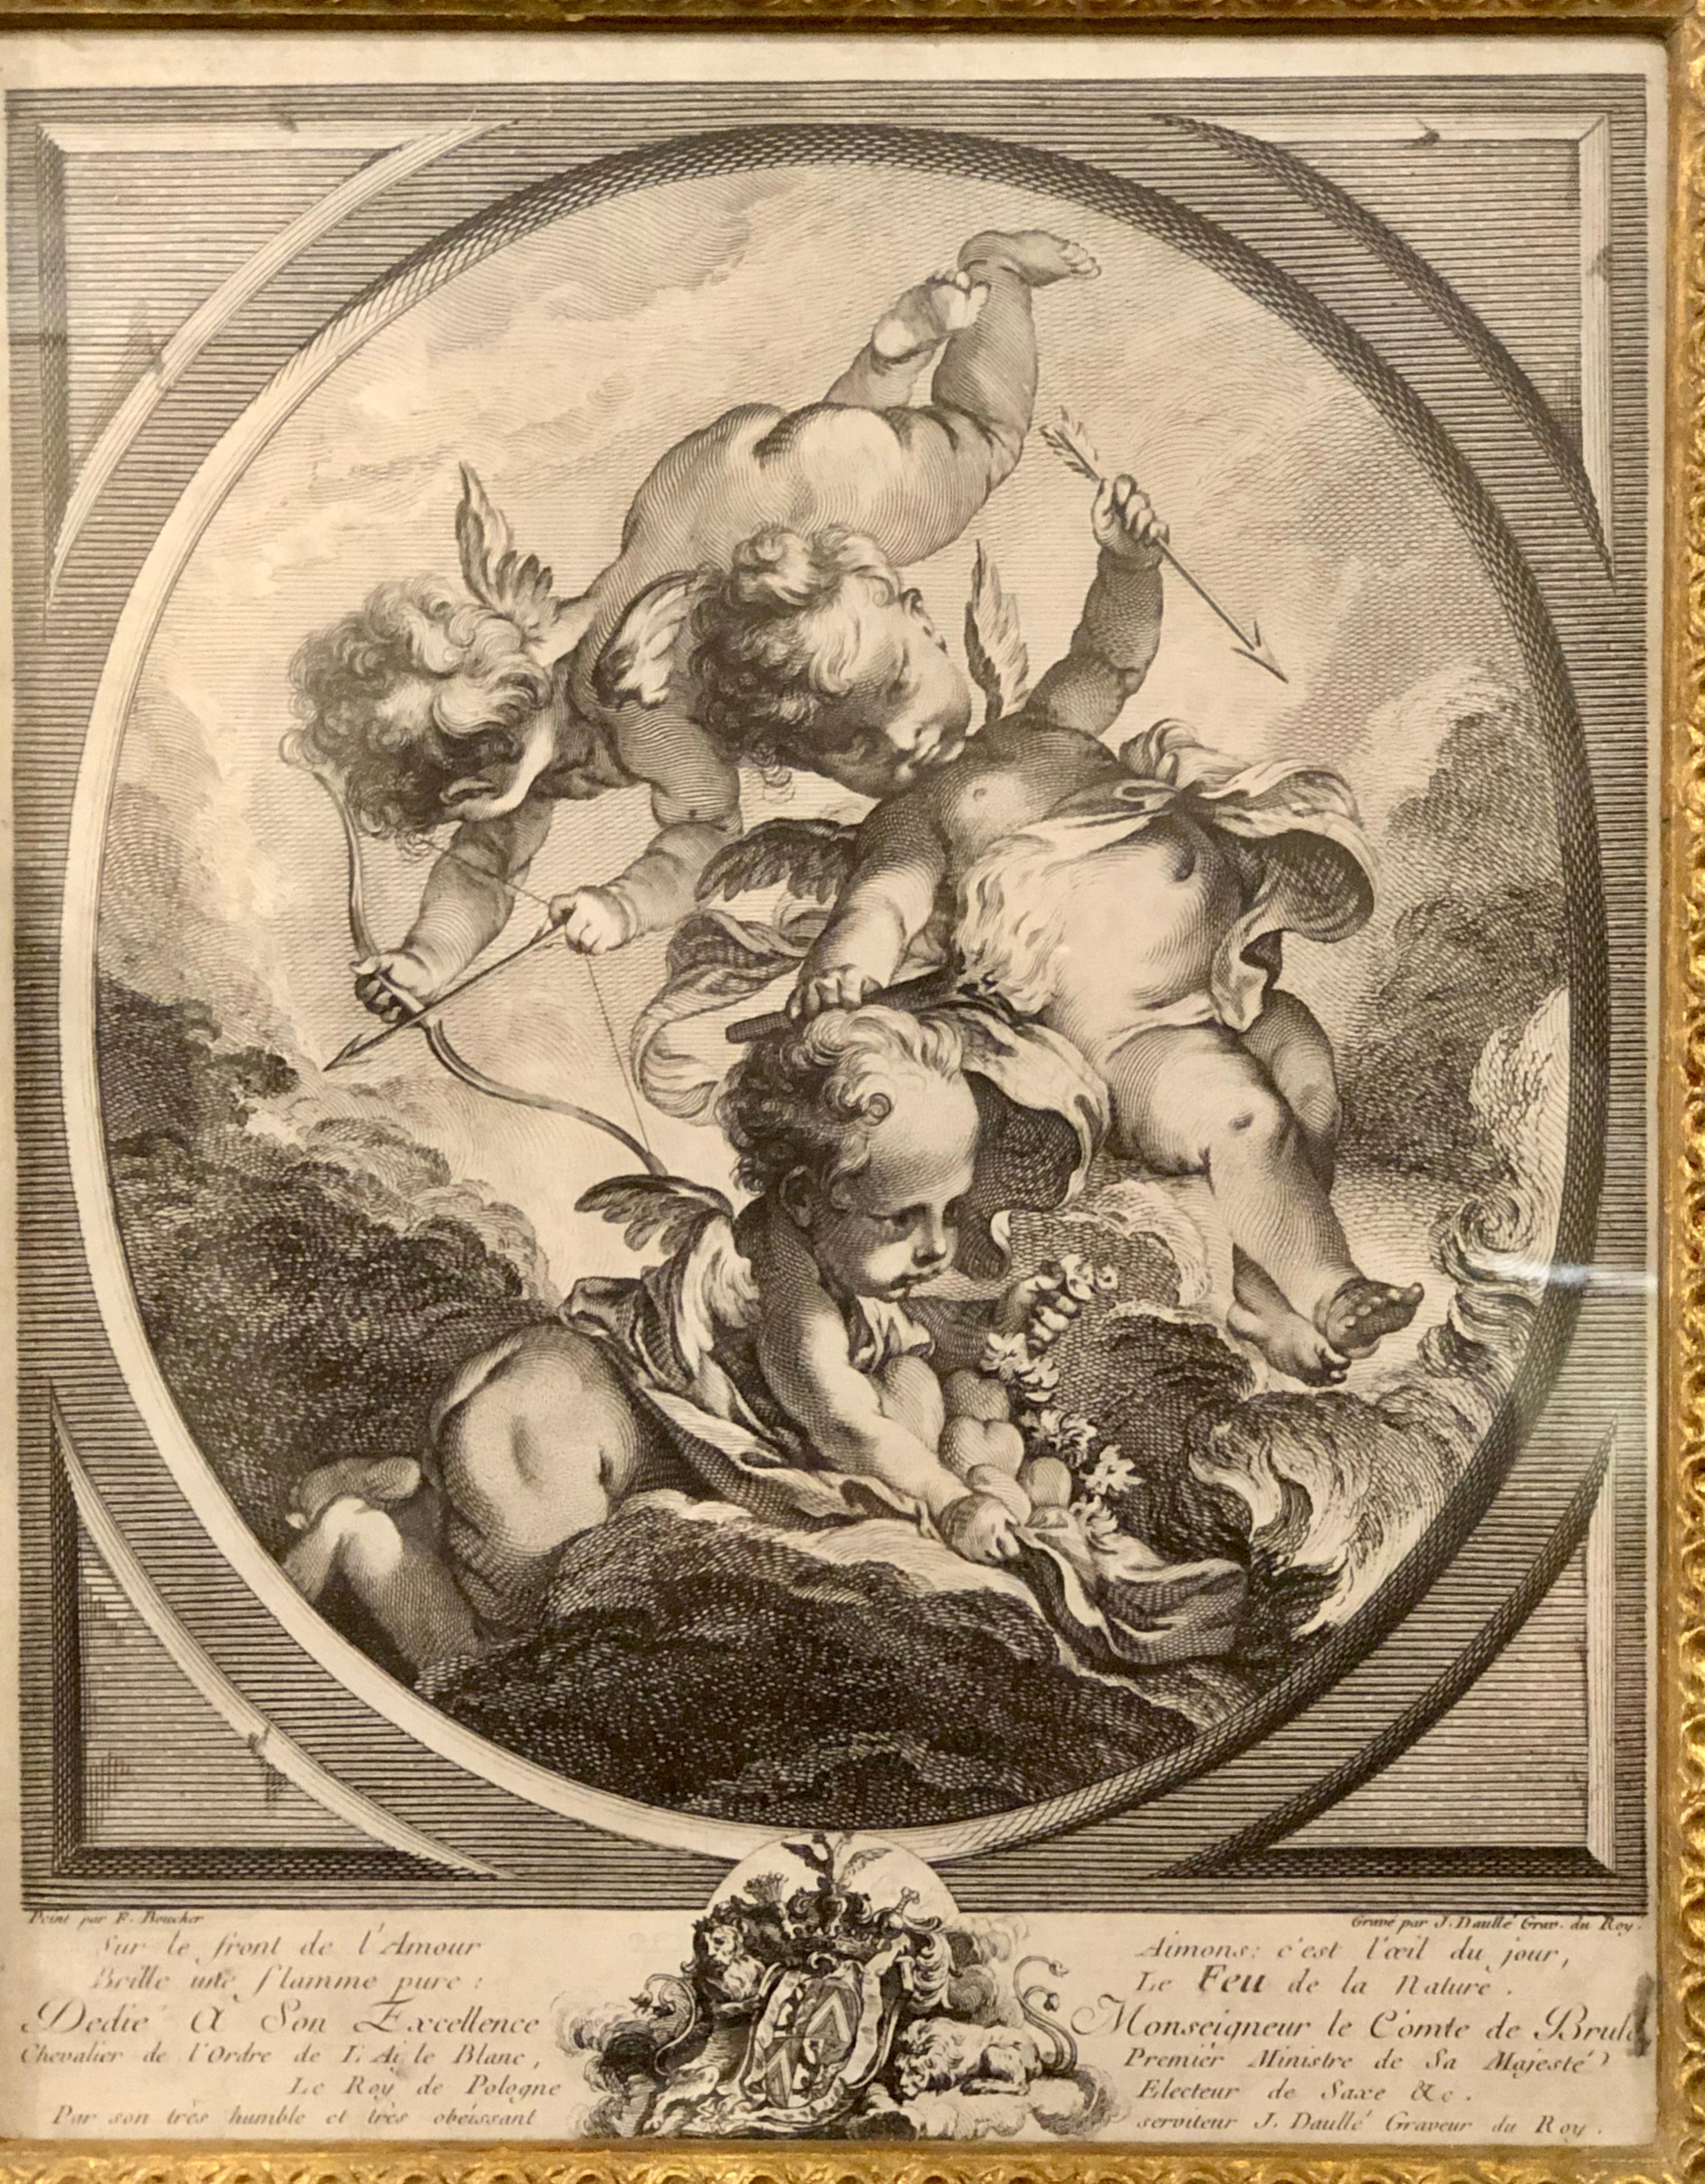 Four Framed Elements “Putti” Etchings after François Boucher’s 1